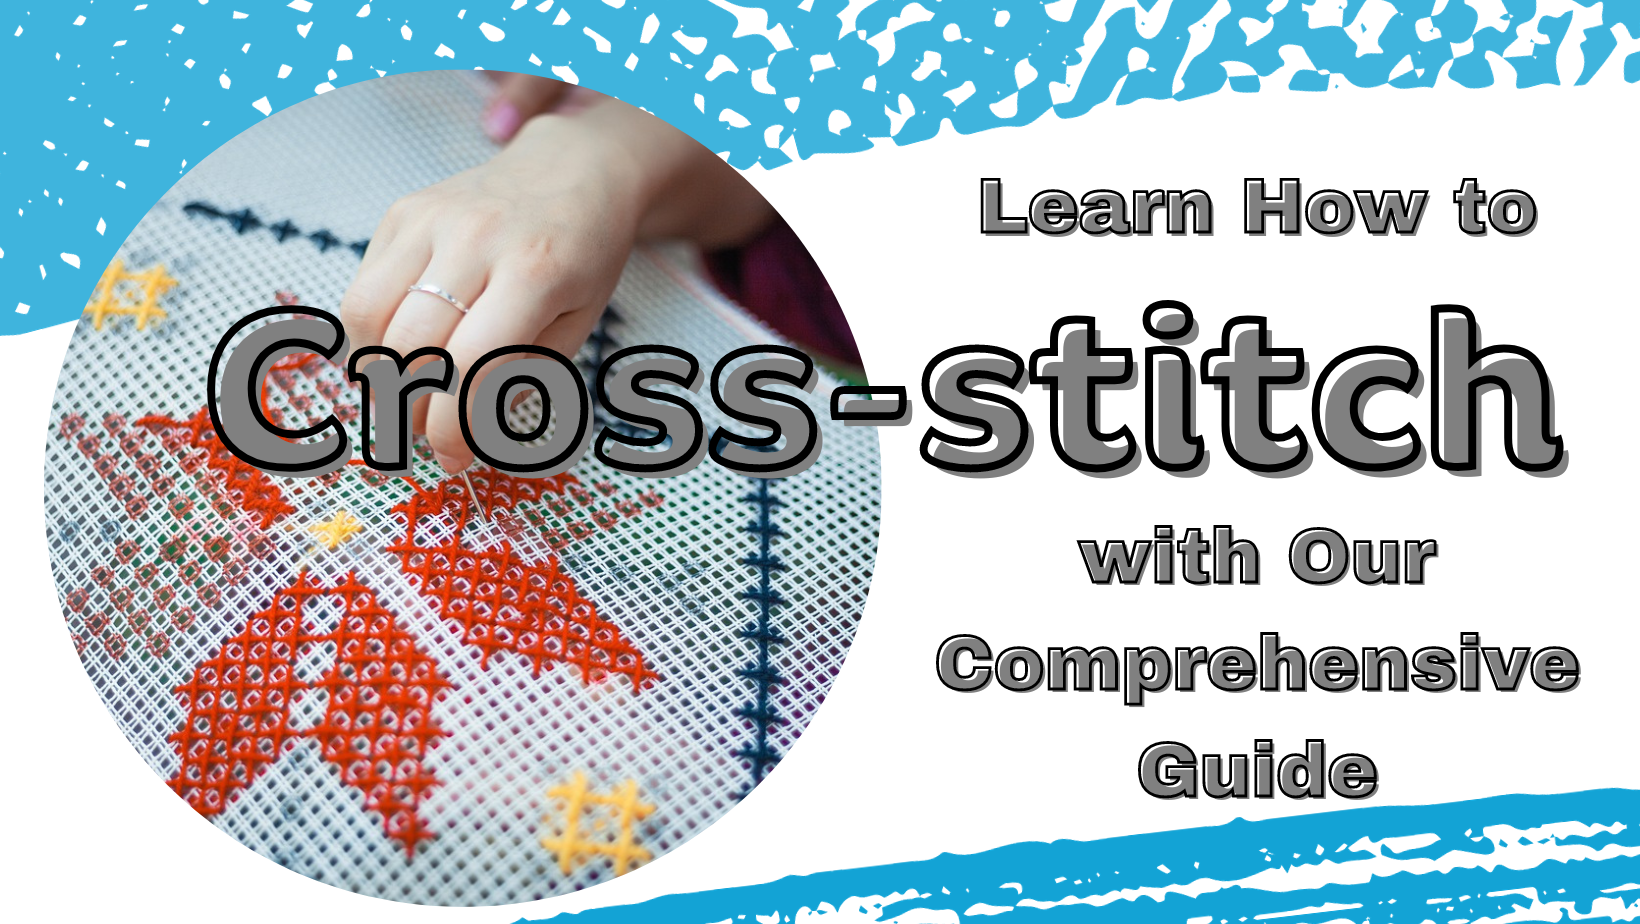 Learn How to Cross-Stitch with Our Comprehensive Guide